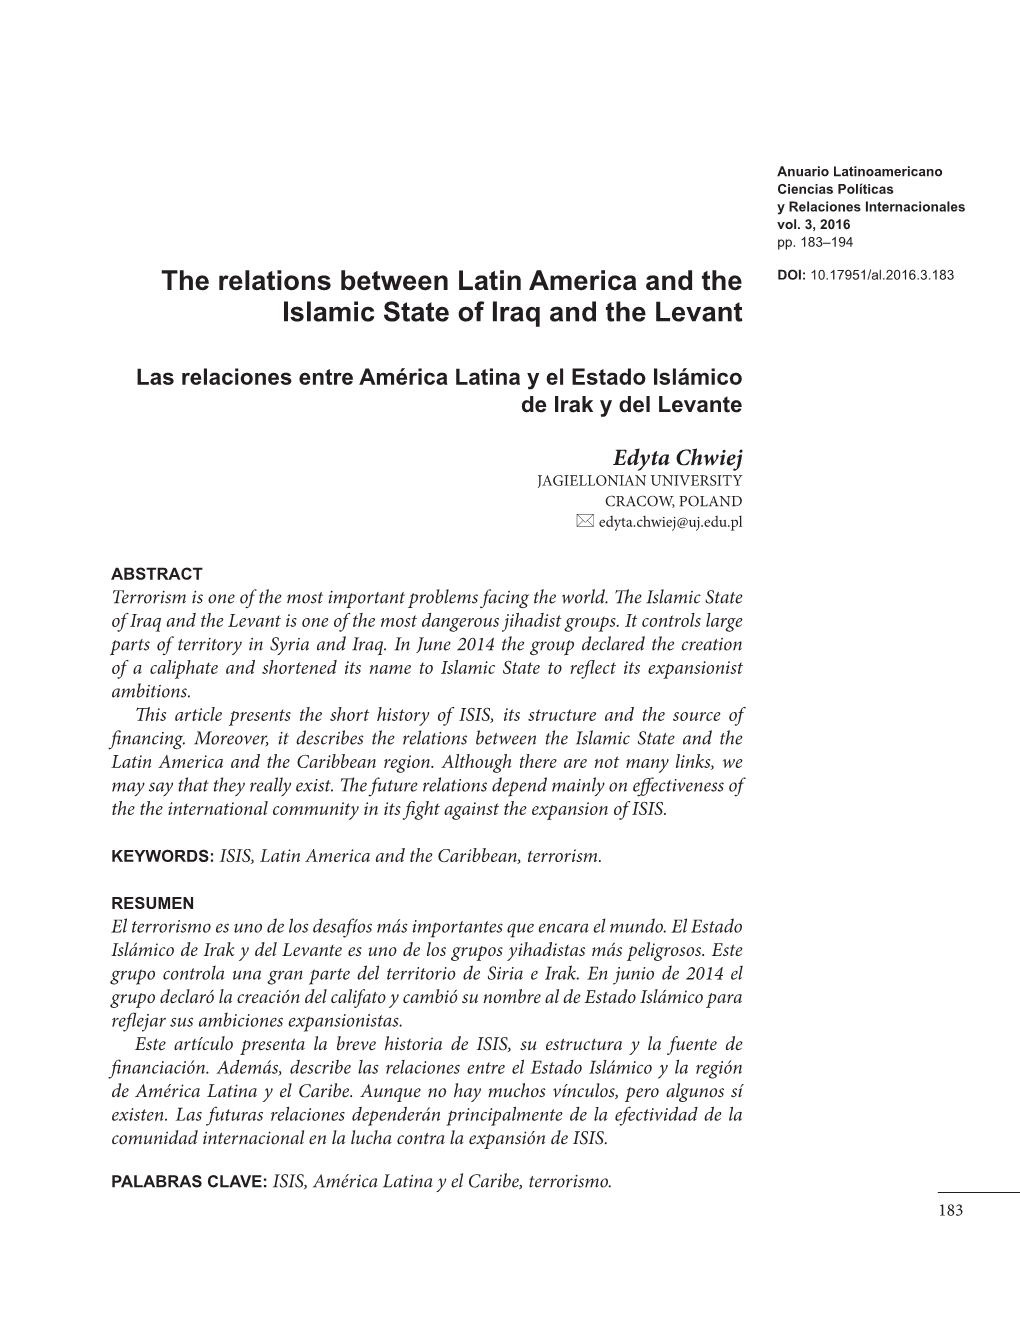 The Relations Between Latin America and the Islamic State Of